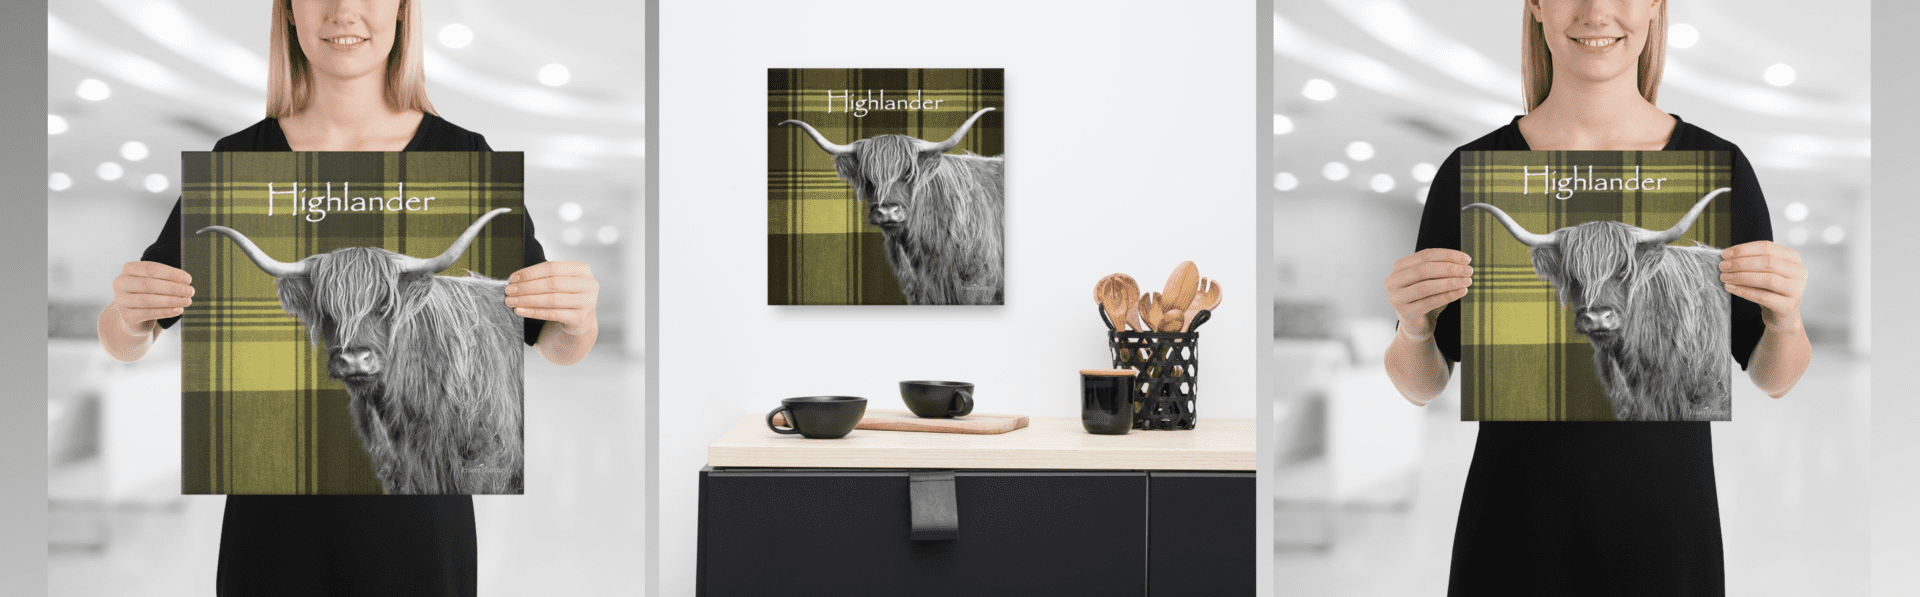 Highland cow on yellow plaid background.